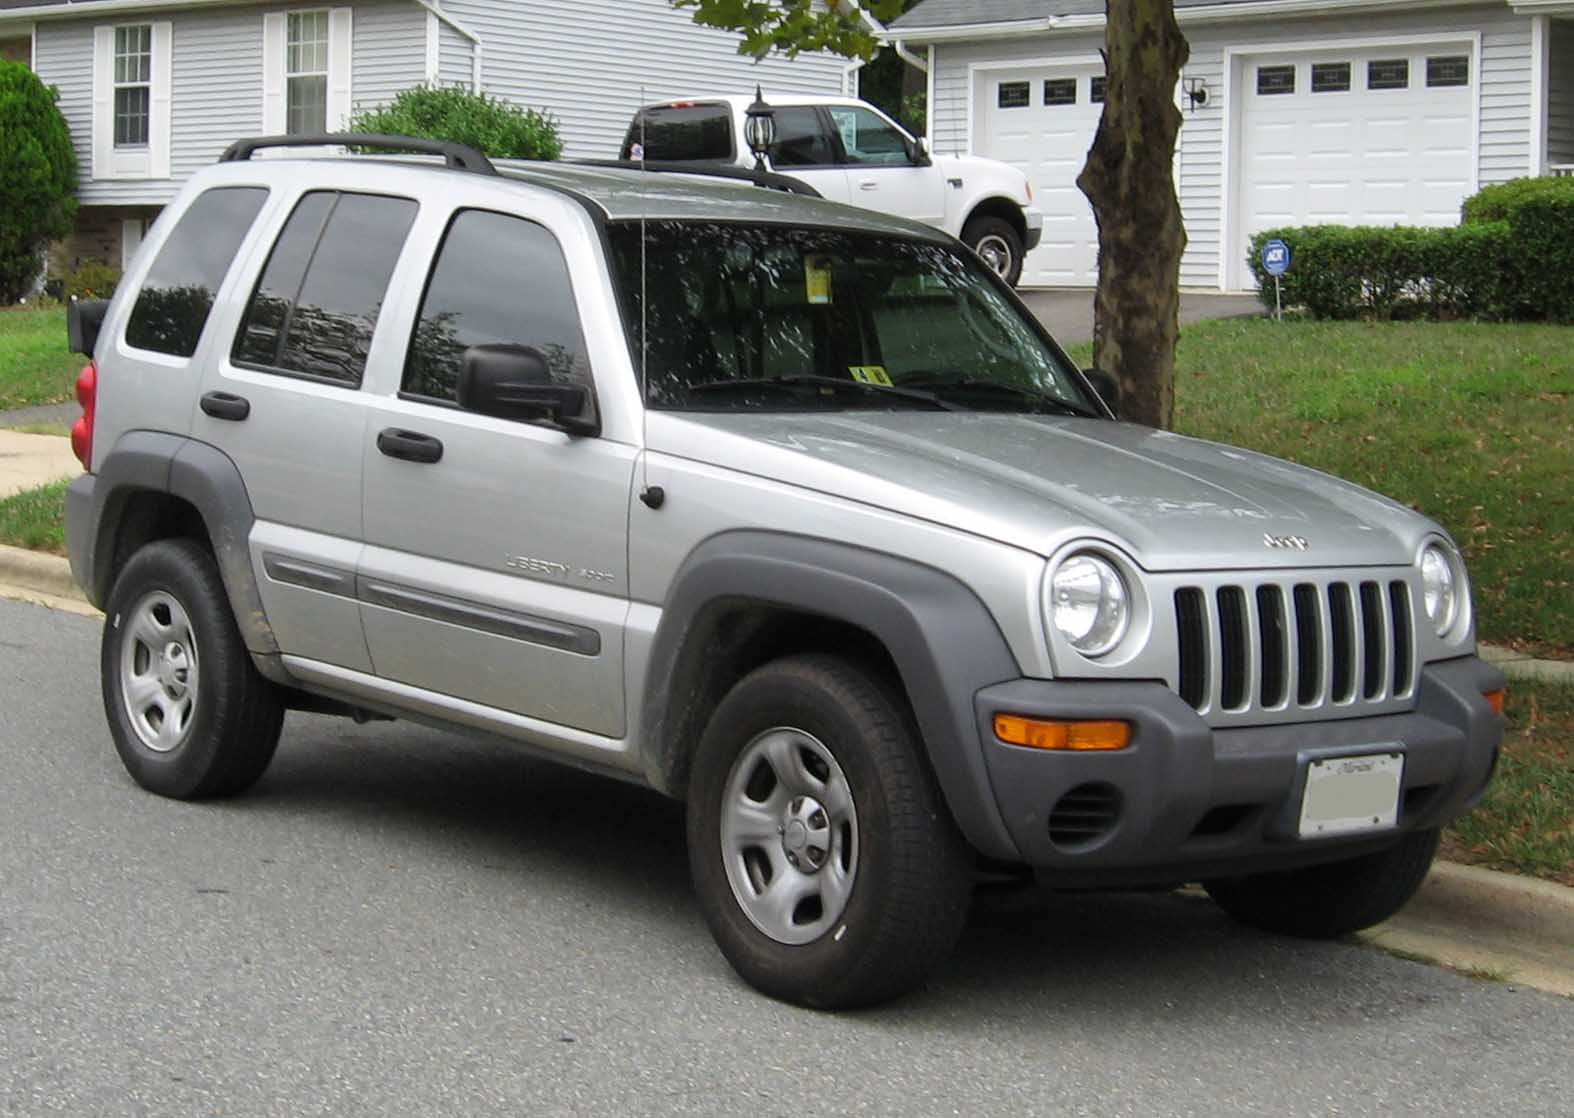 2003 Jeep Liberty Pictures CarGurus